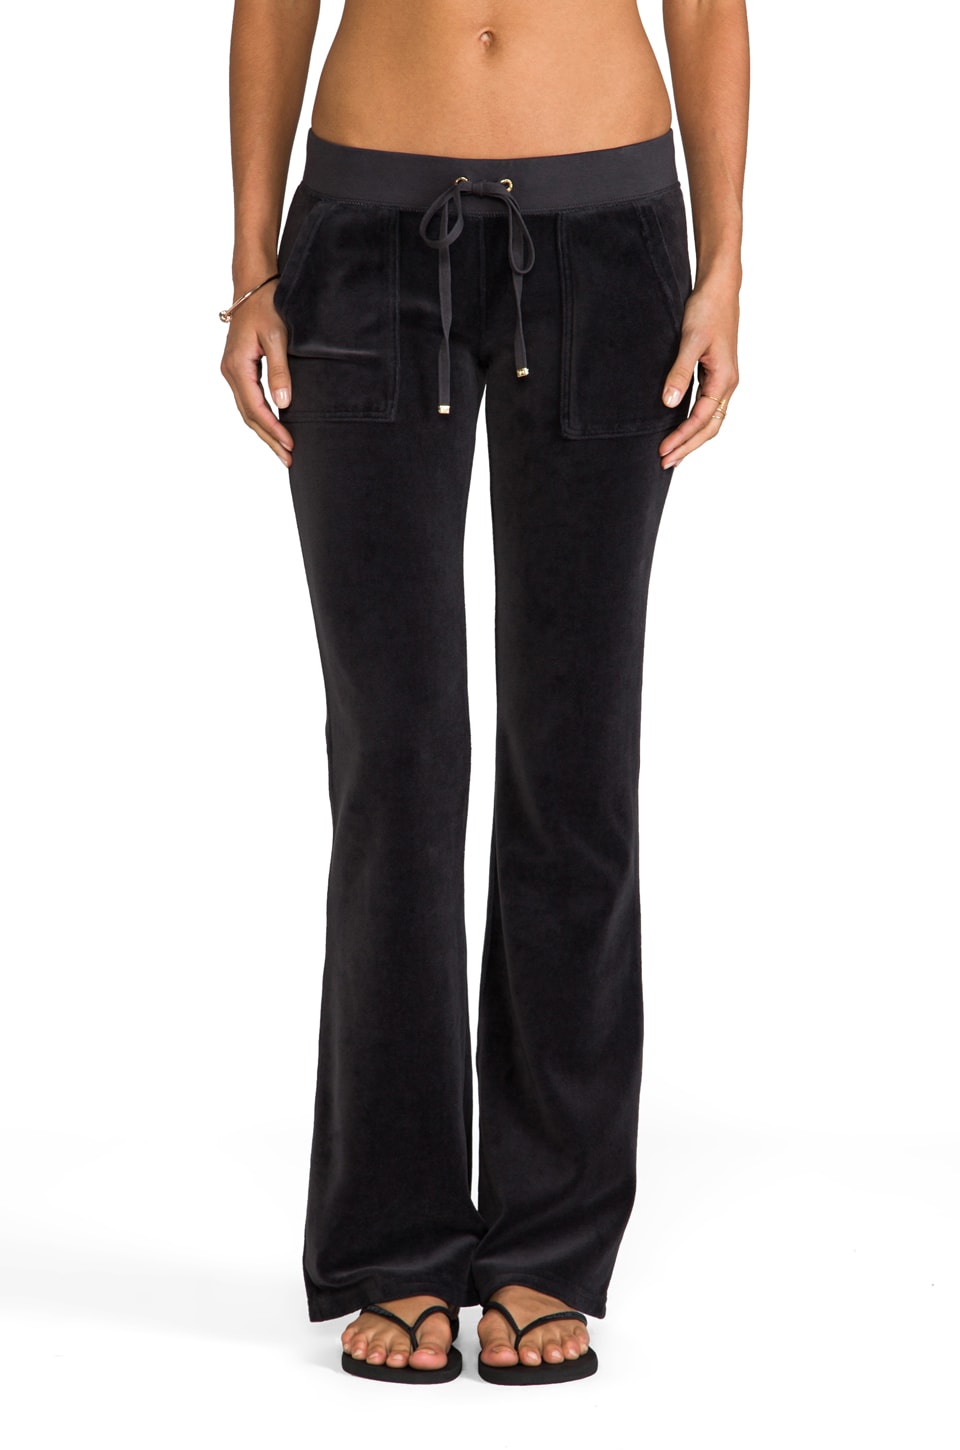 Juicy Couture Velour Bootcut Pant with Snap Pockets in Top Hat | REVOLVE